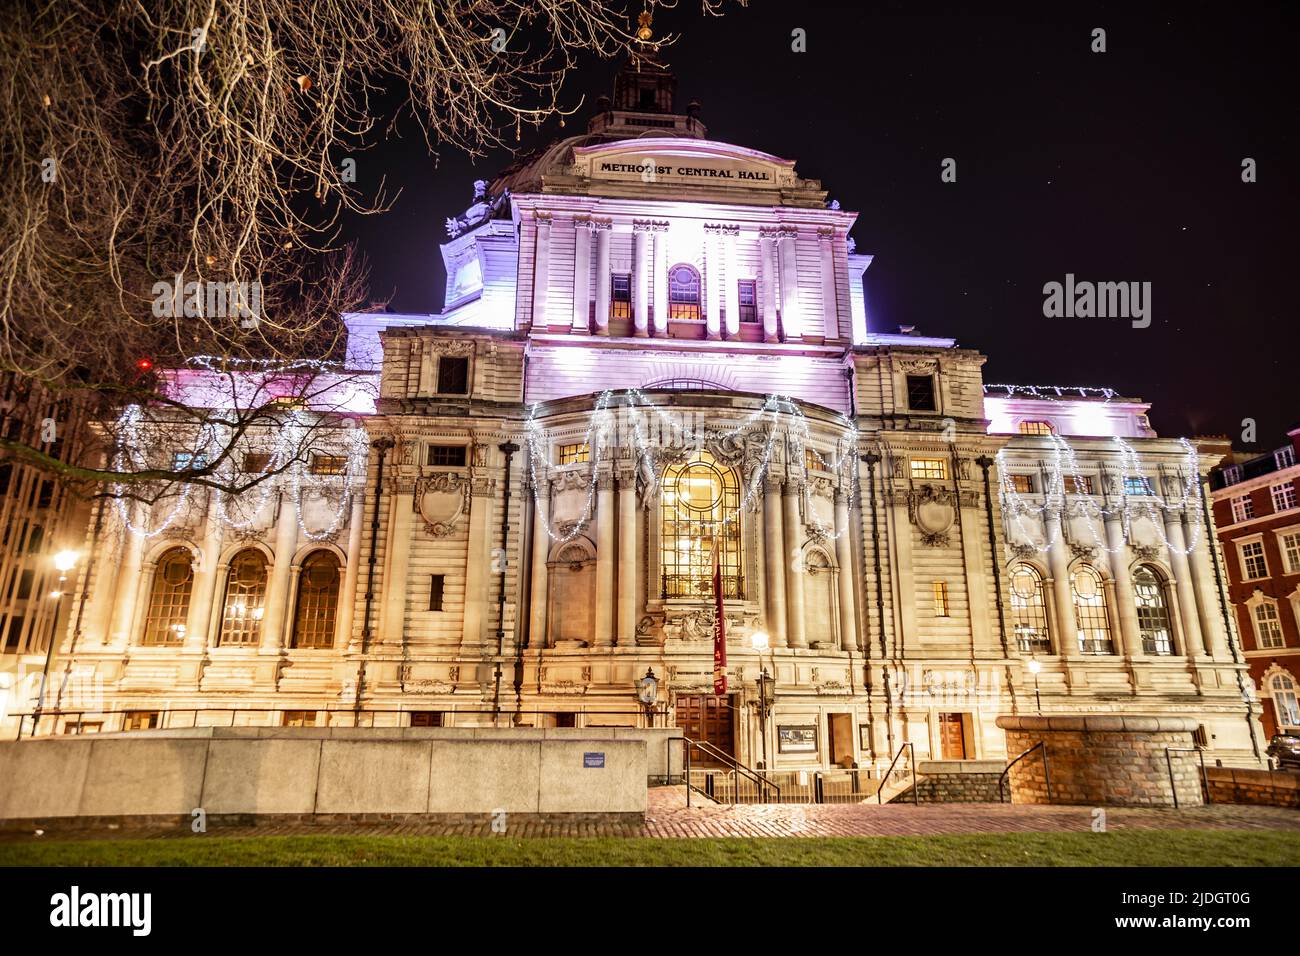 Methodist Central Hall Westminster Central Hall Westminster at night London England Europe Stock Photo